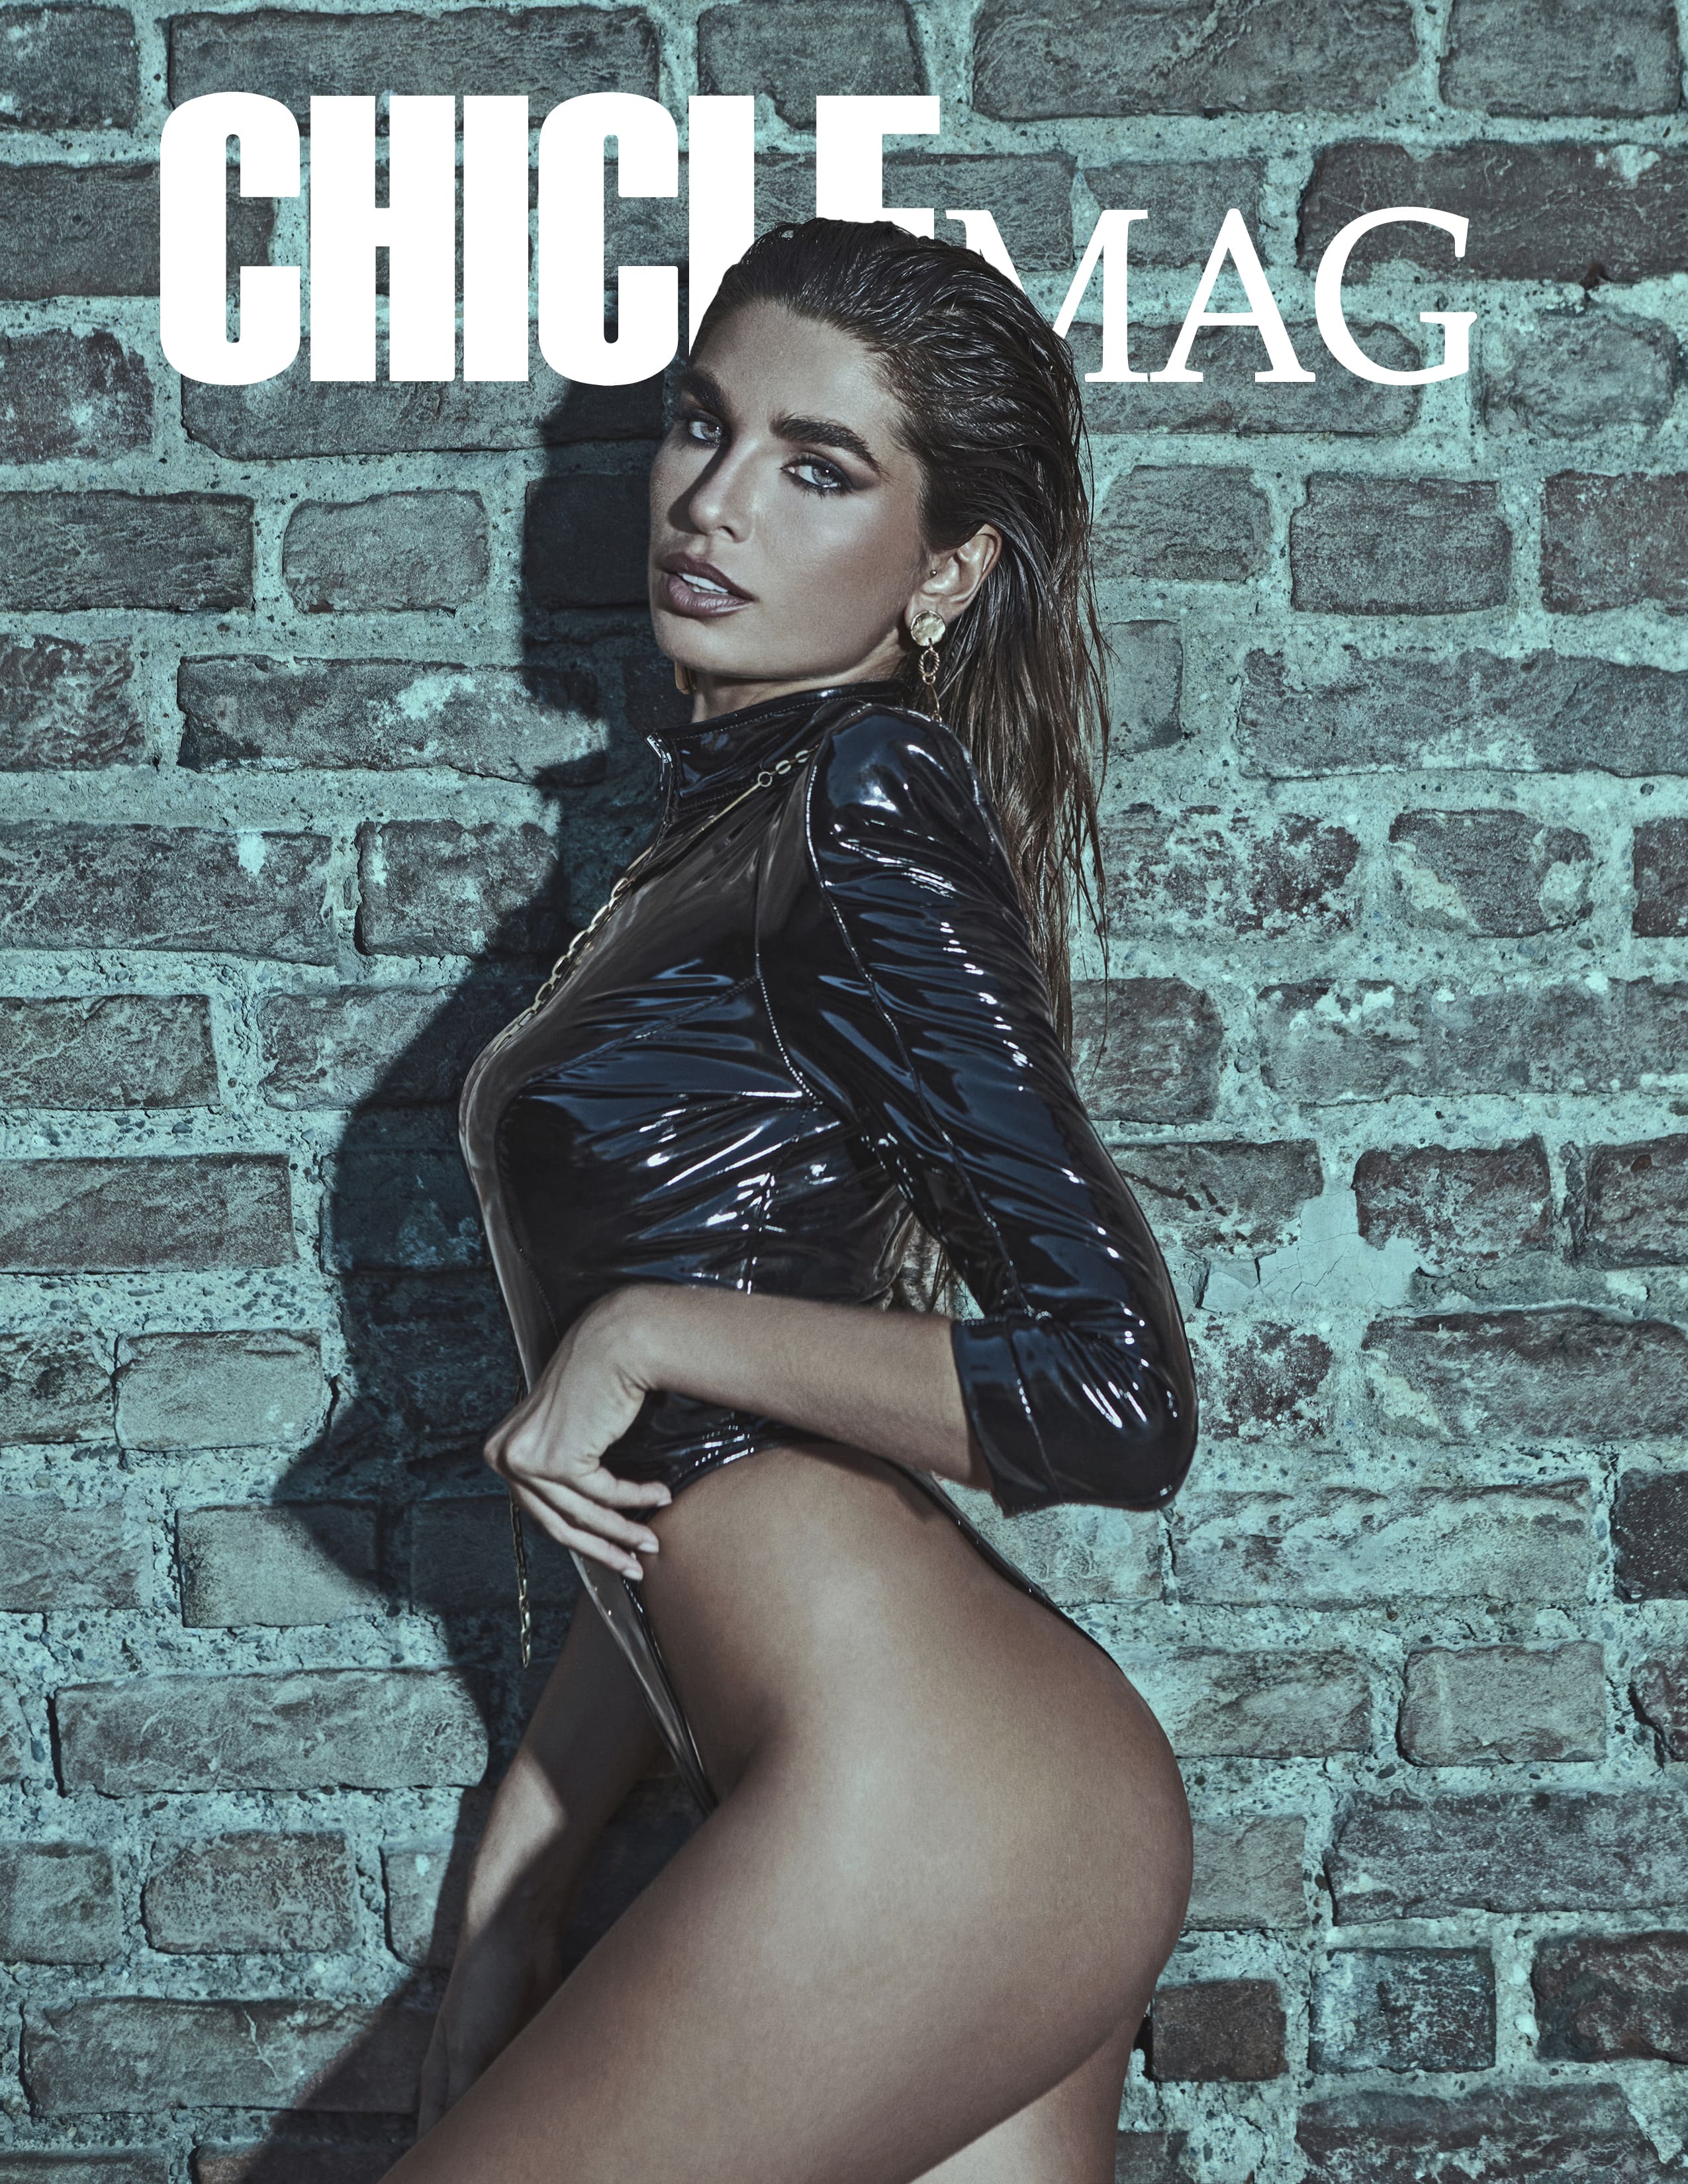 Read more about the article Chicle Mag #55 by Emiliano Santapaola